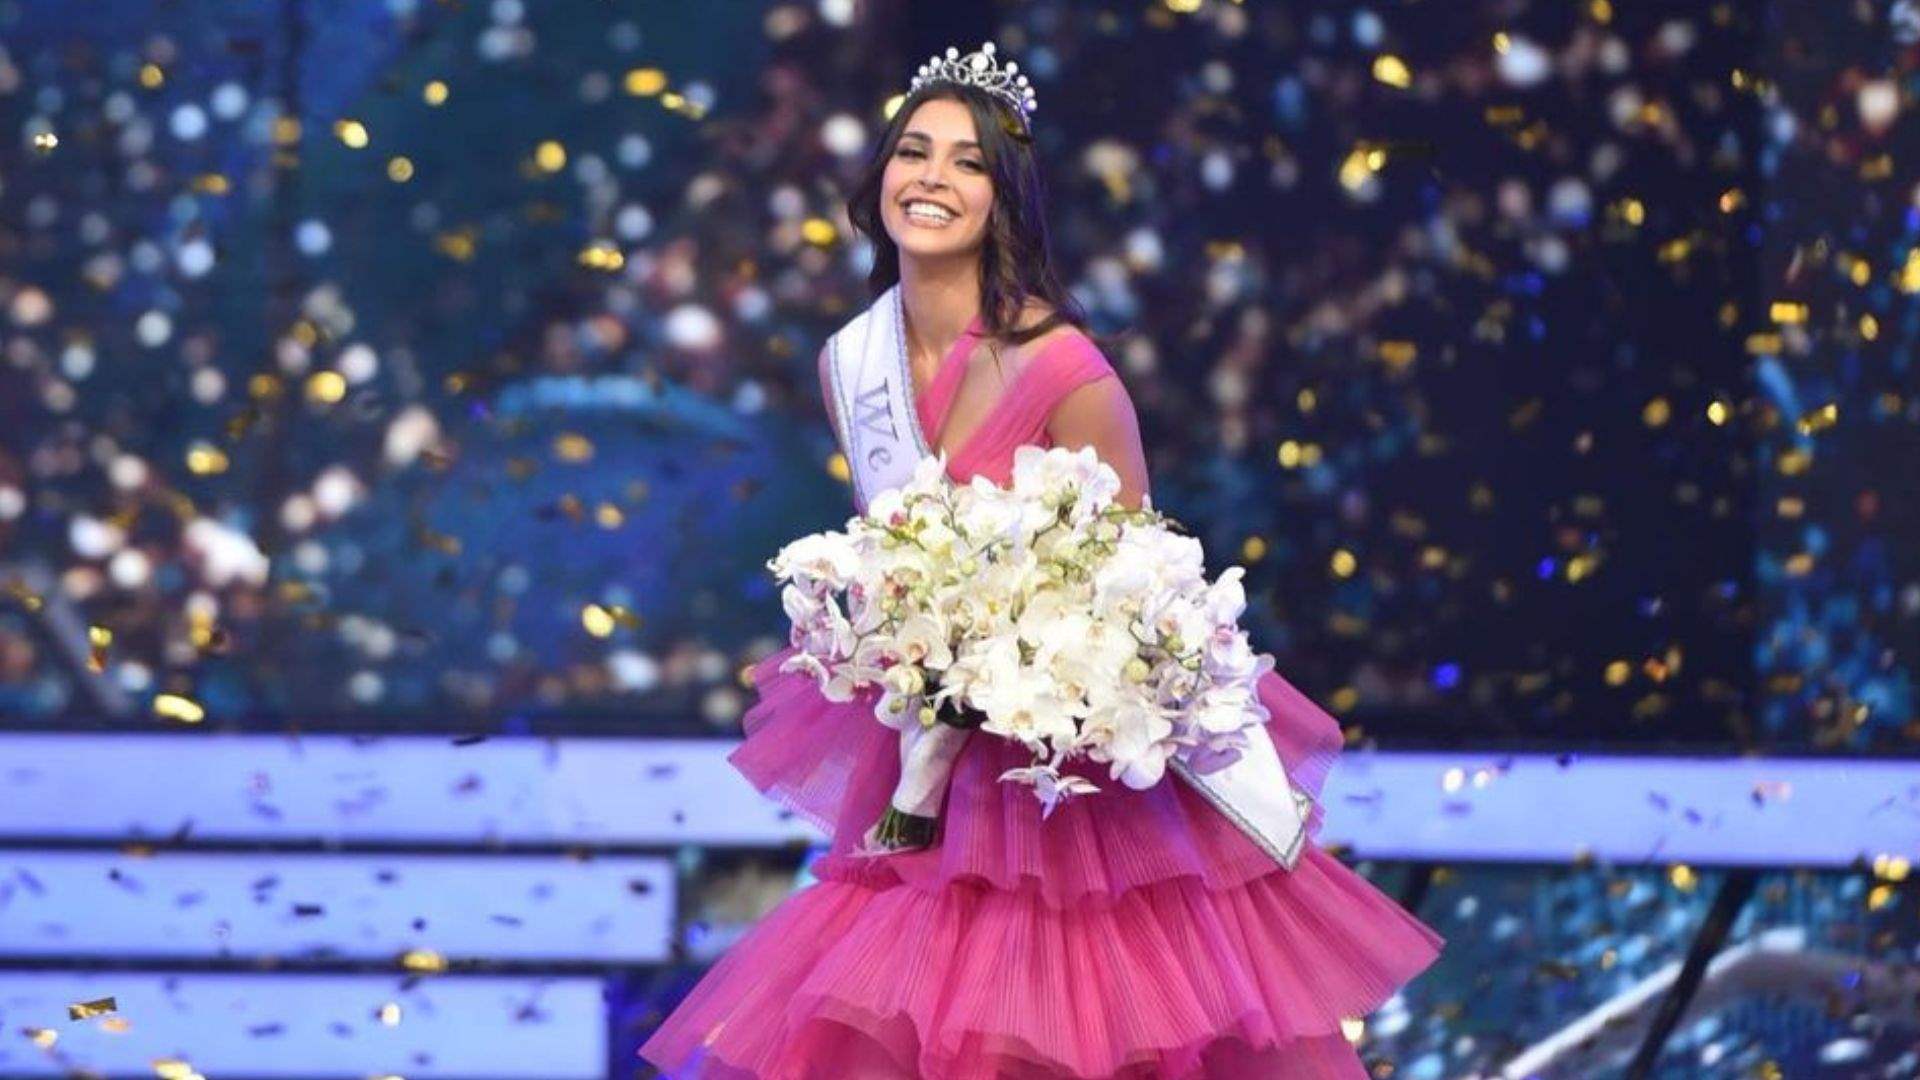 Yasmina Zaytoun performs exceptionally in the &quot;Beauty with a Purpose&quot; challenge, earning her a spot in the Top 40 of the Miss World competition